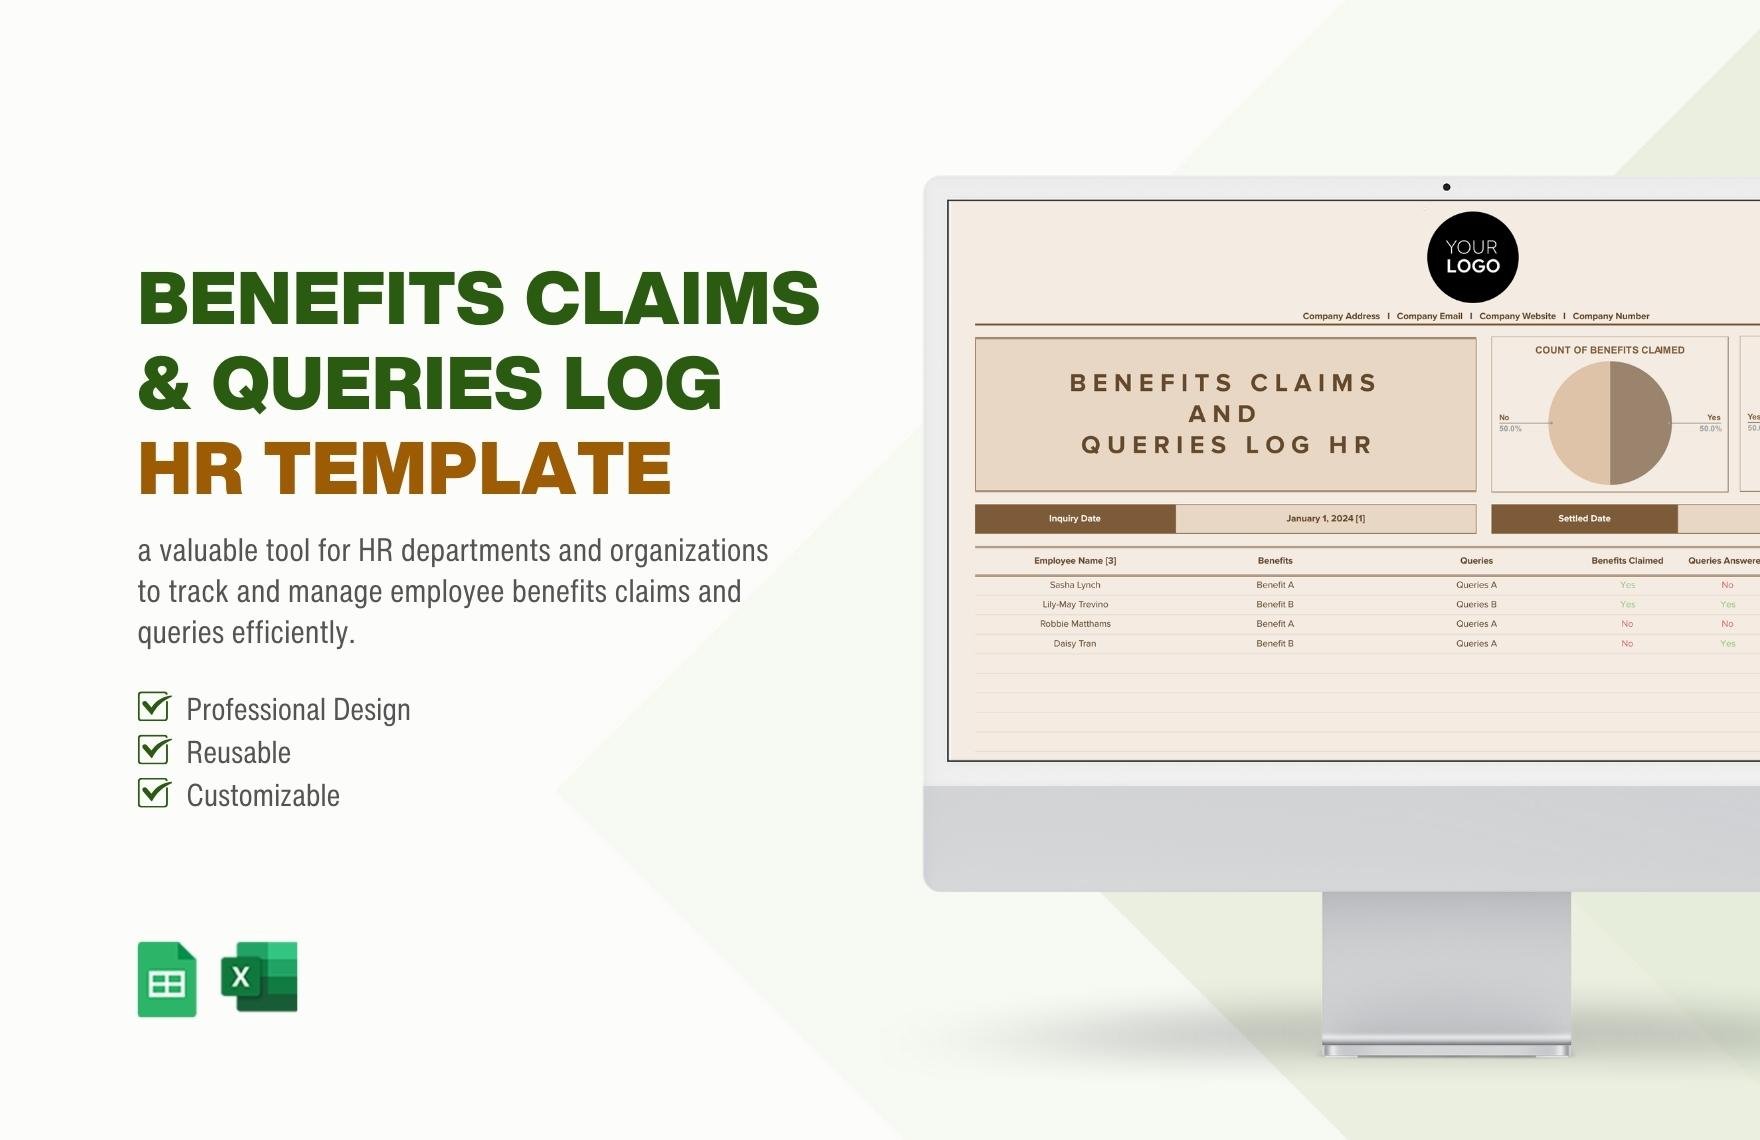 Benefits Claims & Queries Log HR Template